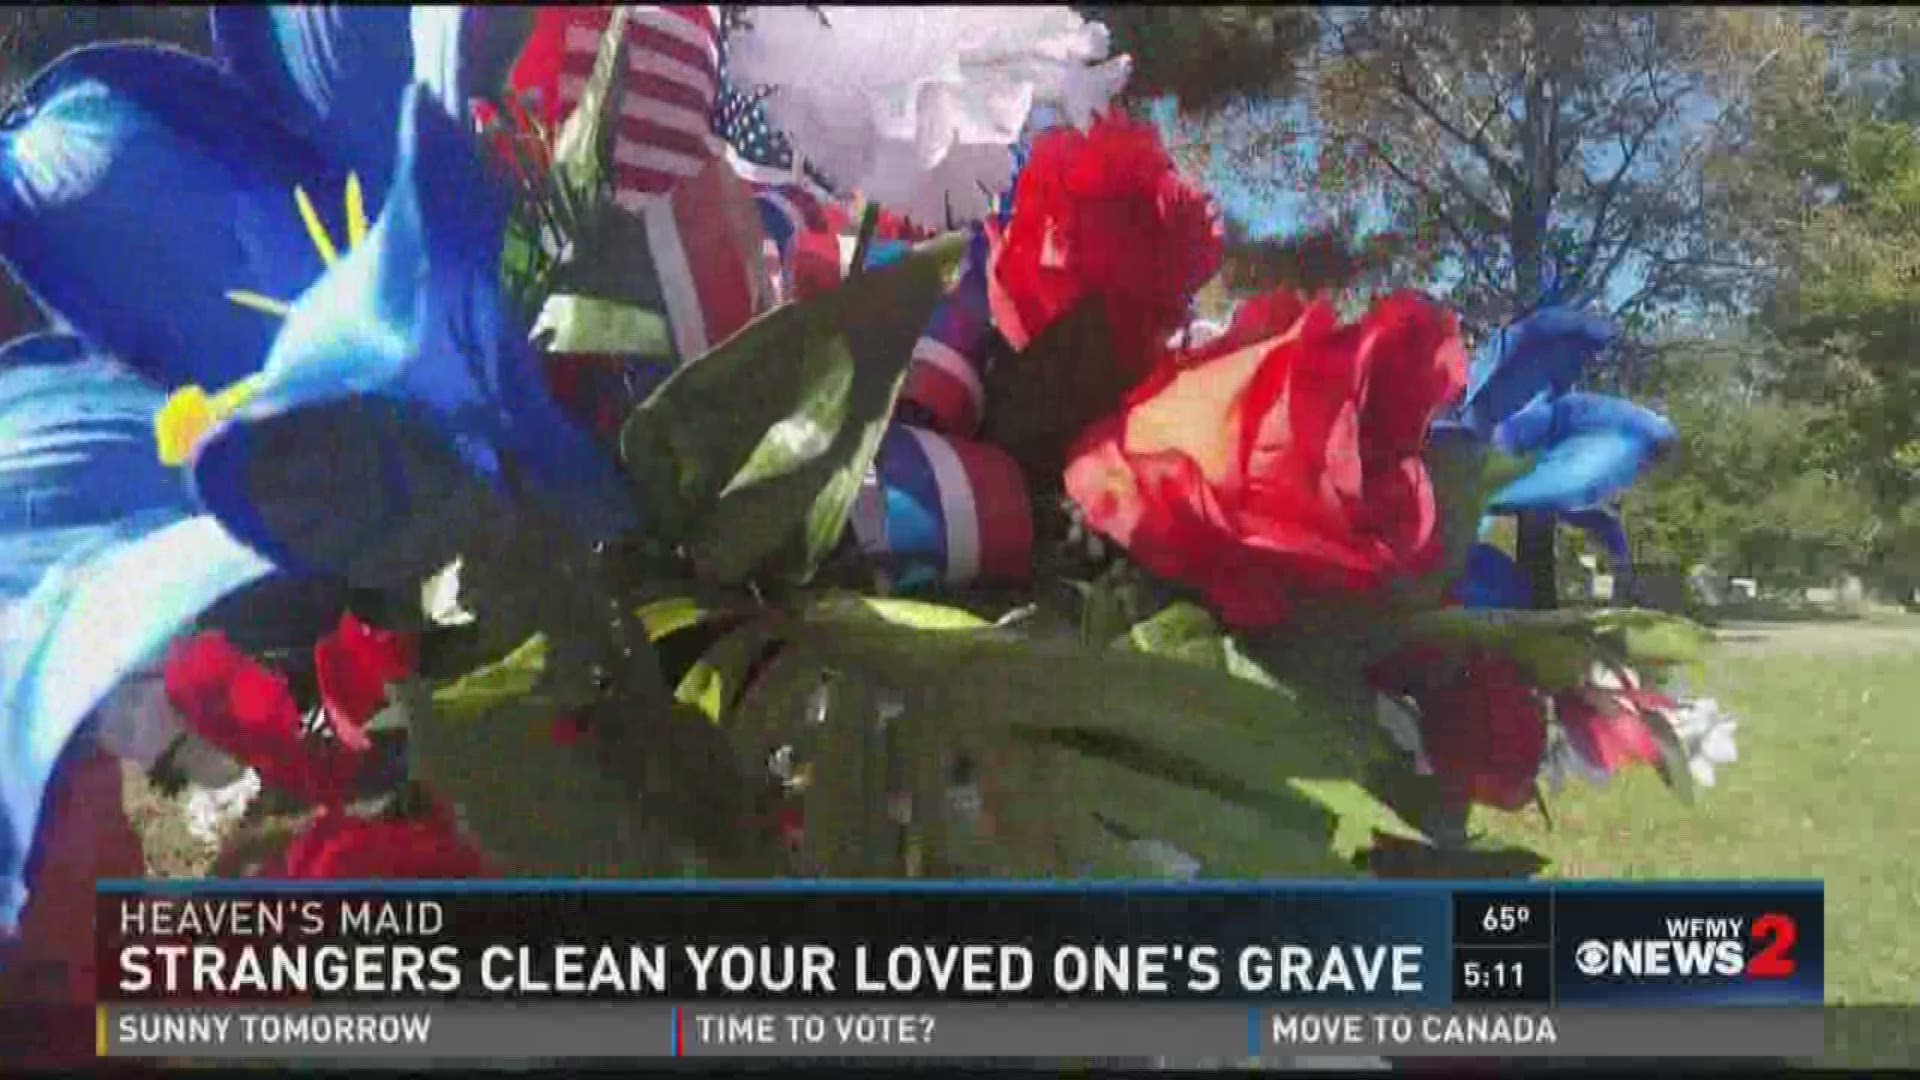 Strangers Clean Your Loved One's Grave